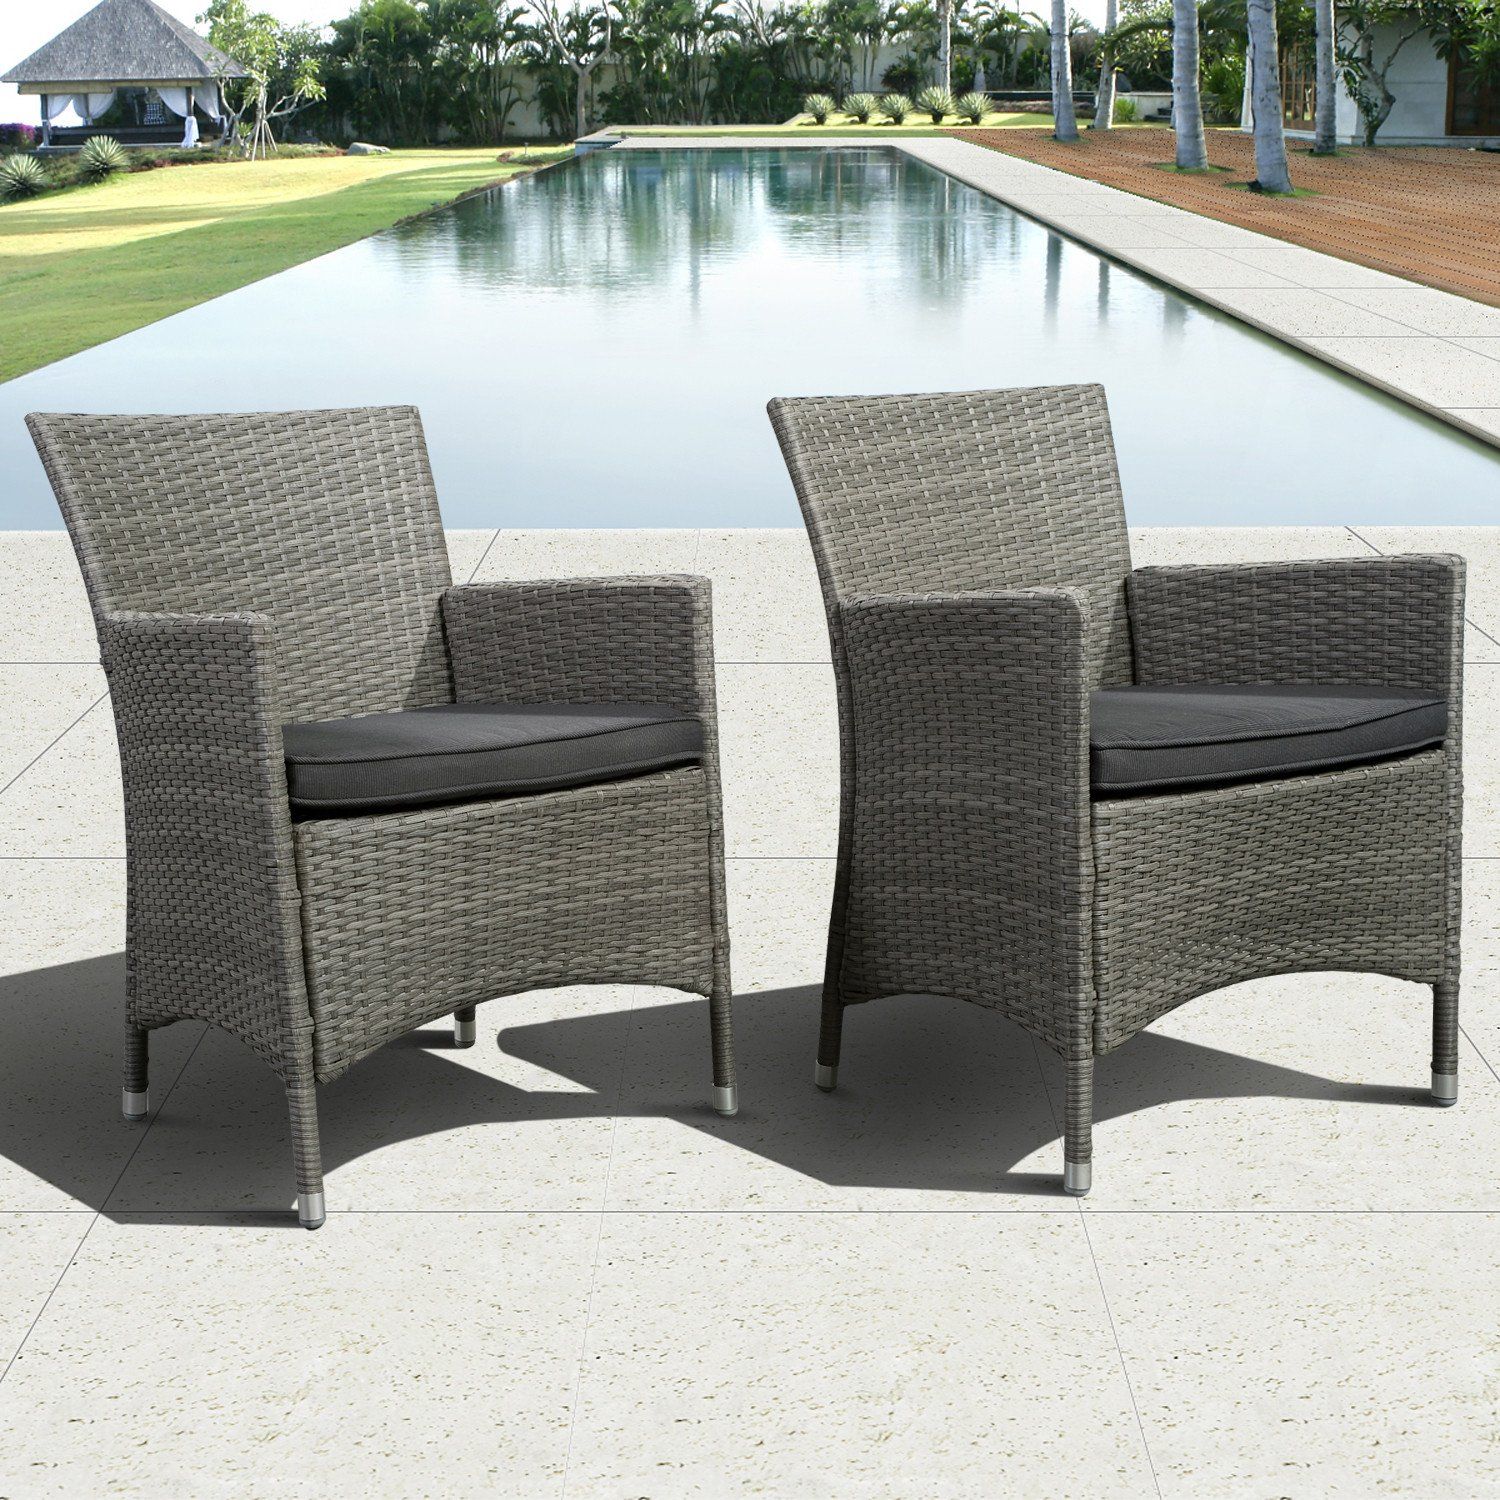 Grand New Liberty Deluxe Square 9 Piece Patio Dining Set Grey With Grey Pertaining To Wicker Square 9 Piece Patio Dining Sets (View 14 of 15)